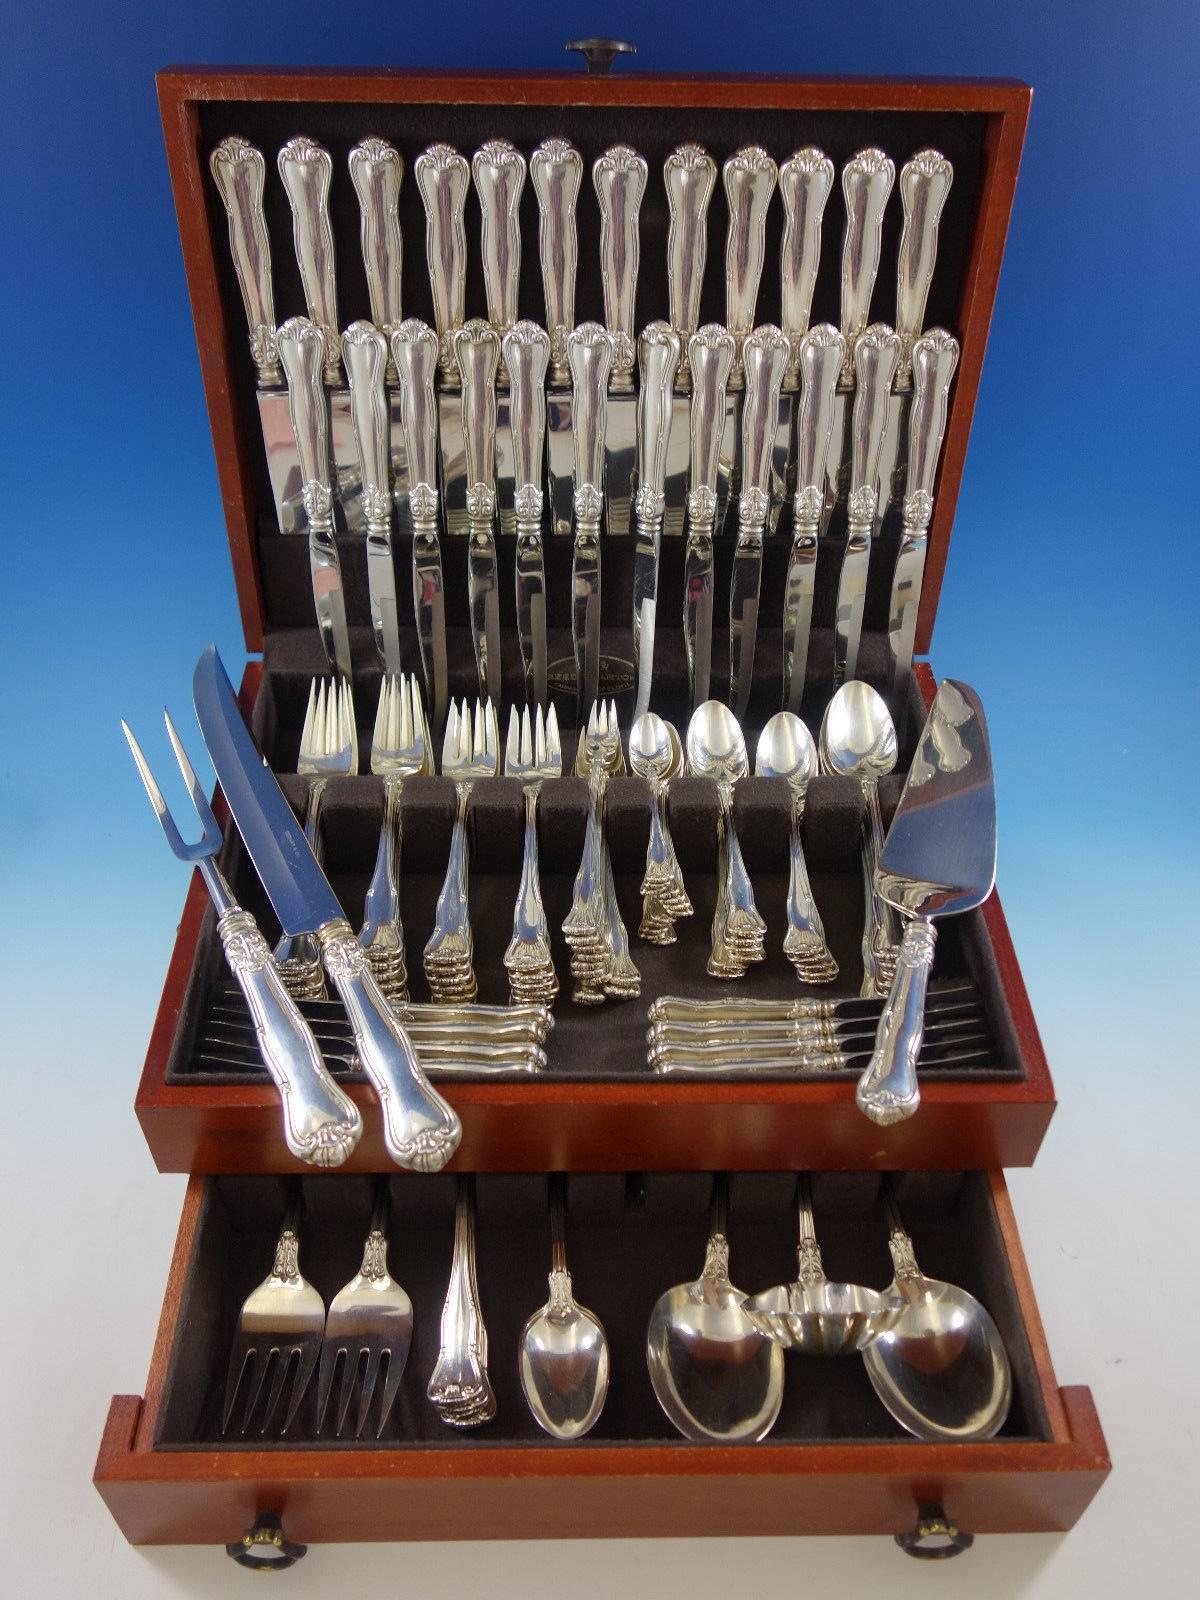 Dinner size Provence by Tiffany & Co. sterling silver flatware set, 116 pieces. This set includes: 12 dinner size knives, 9 3/4", 12 dinner size forks, 7 1/4", 12 salad forks, 6 1/2", 12 teaspoons, 6", 12 place soup spoons, 7